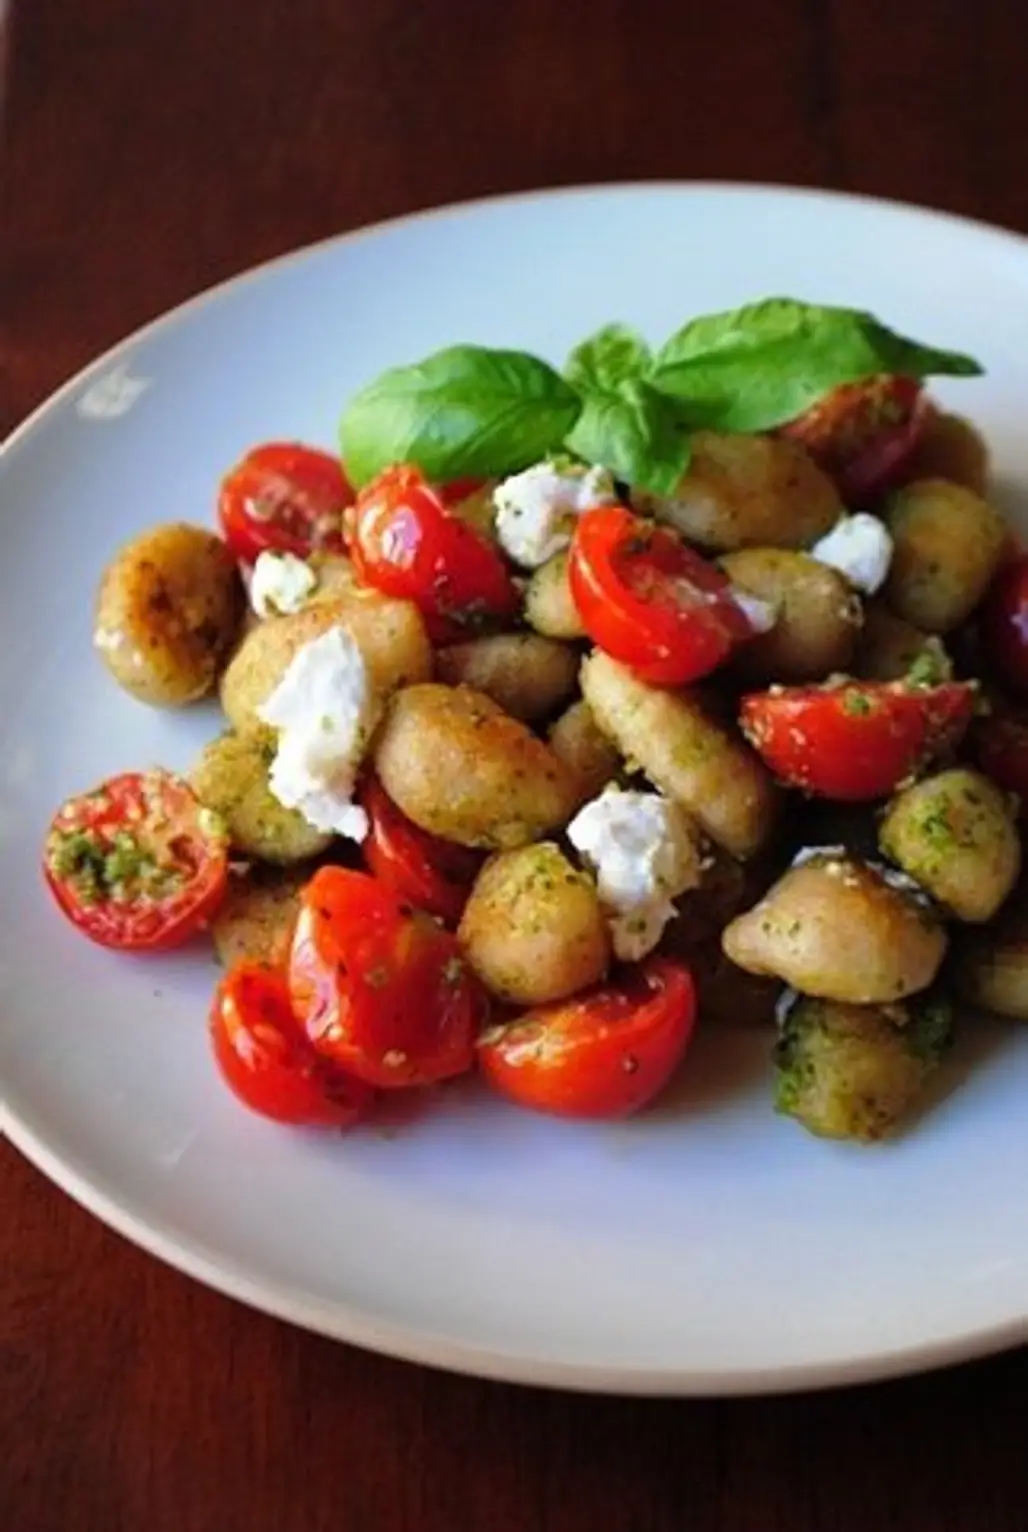 Gnocci with Pesto and Goat Cheese